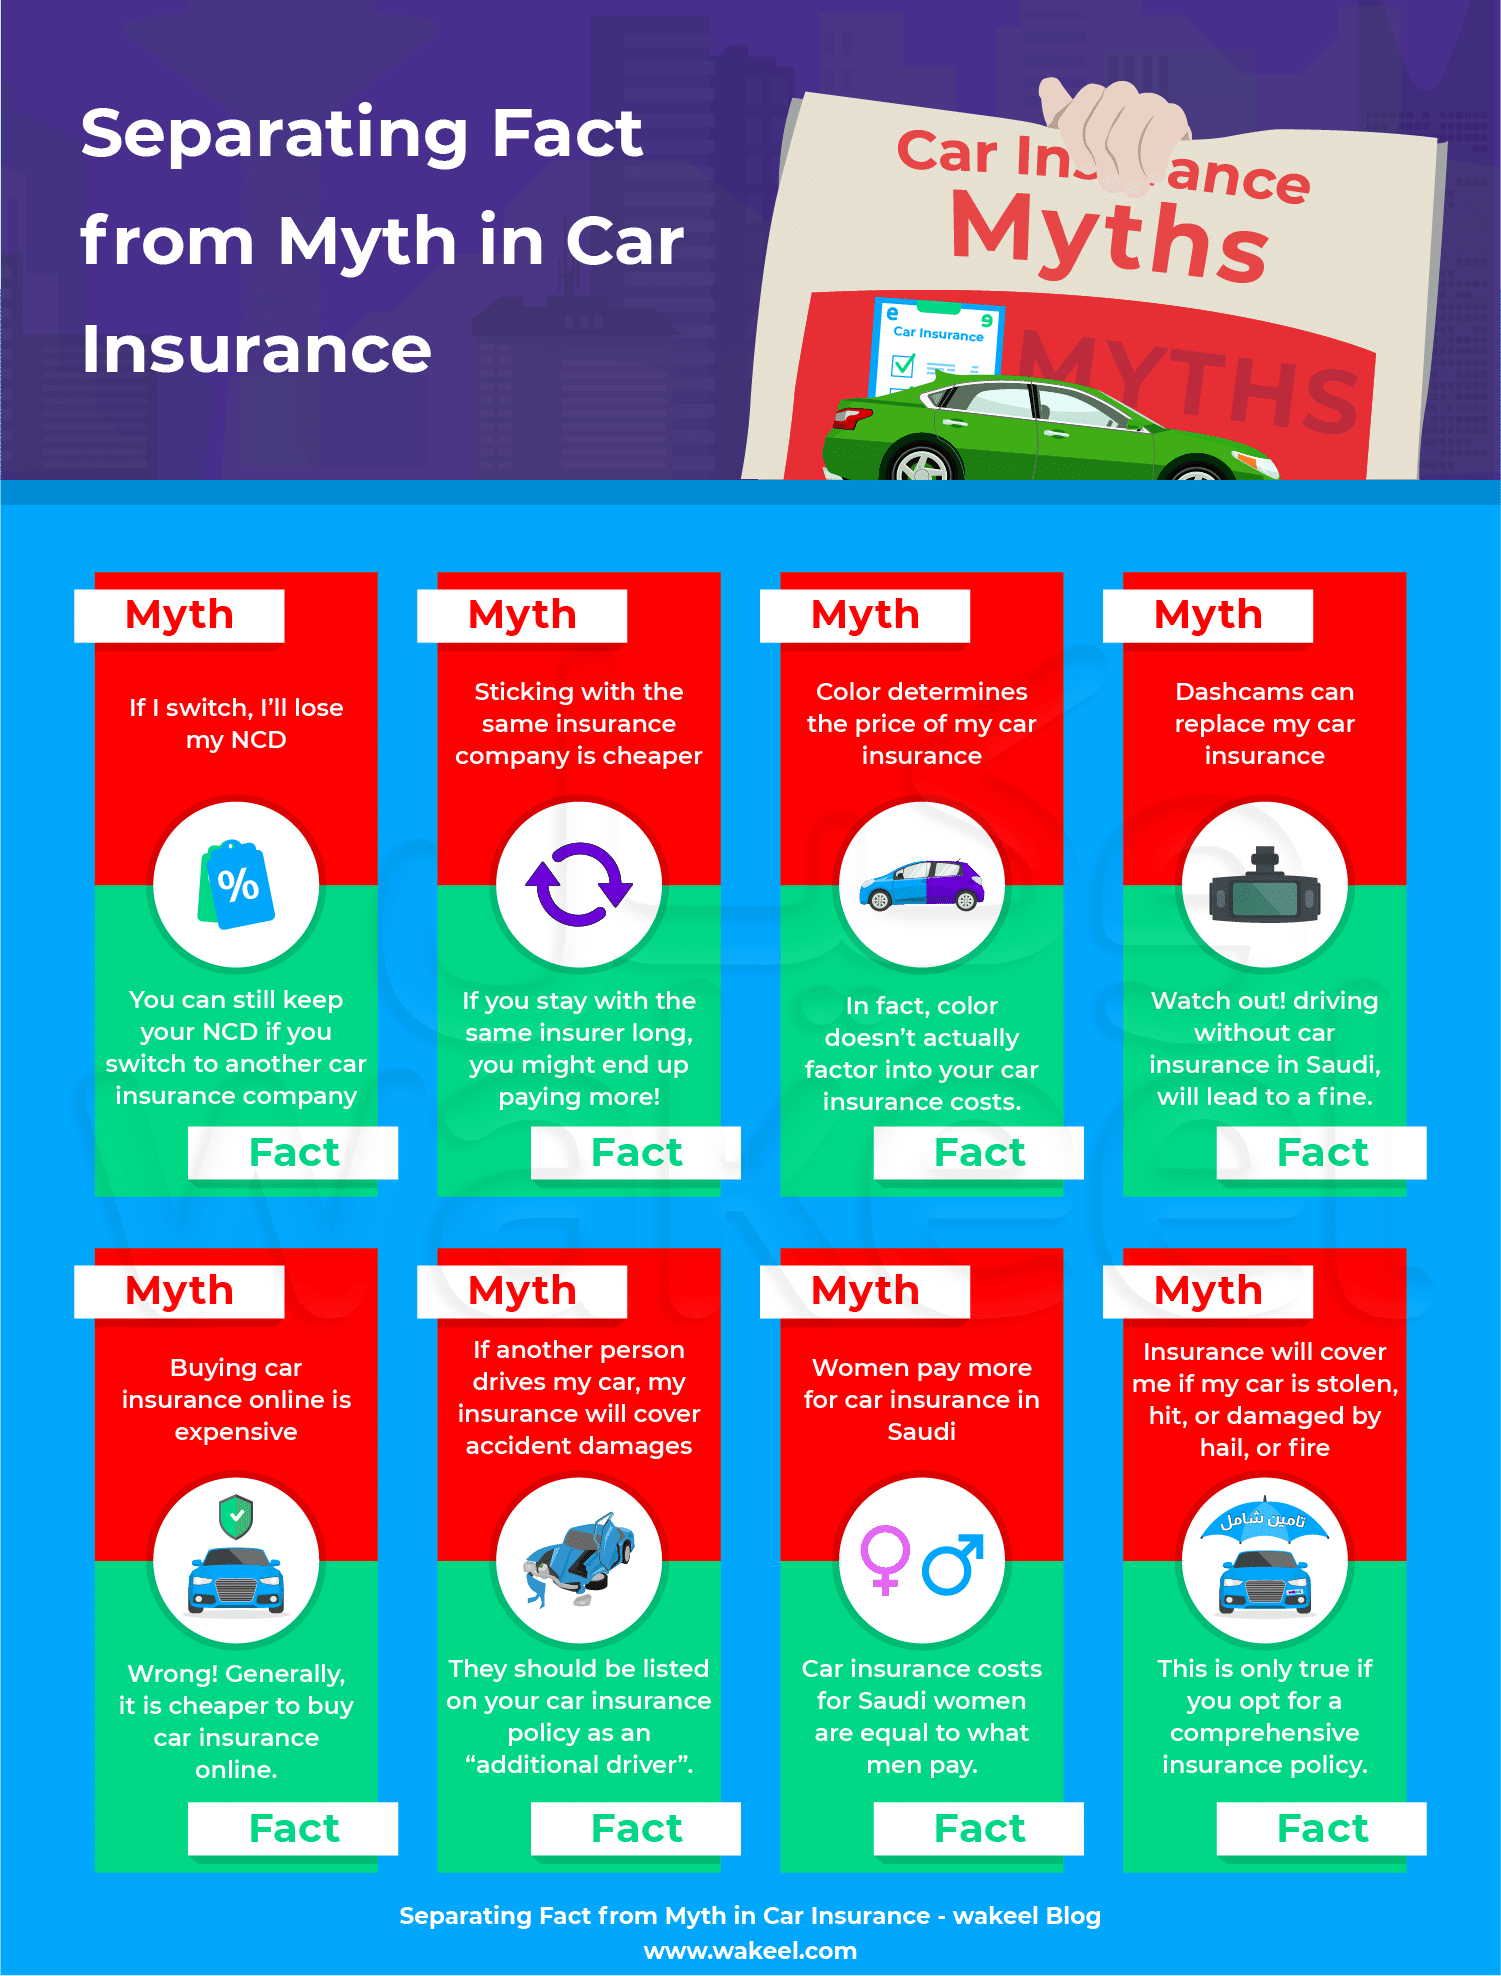 This infographic separates fact from fiction in common car insurance myths. Learn what's true and what's not so you can make informed decisions about your coverage.